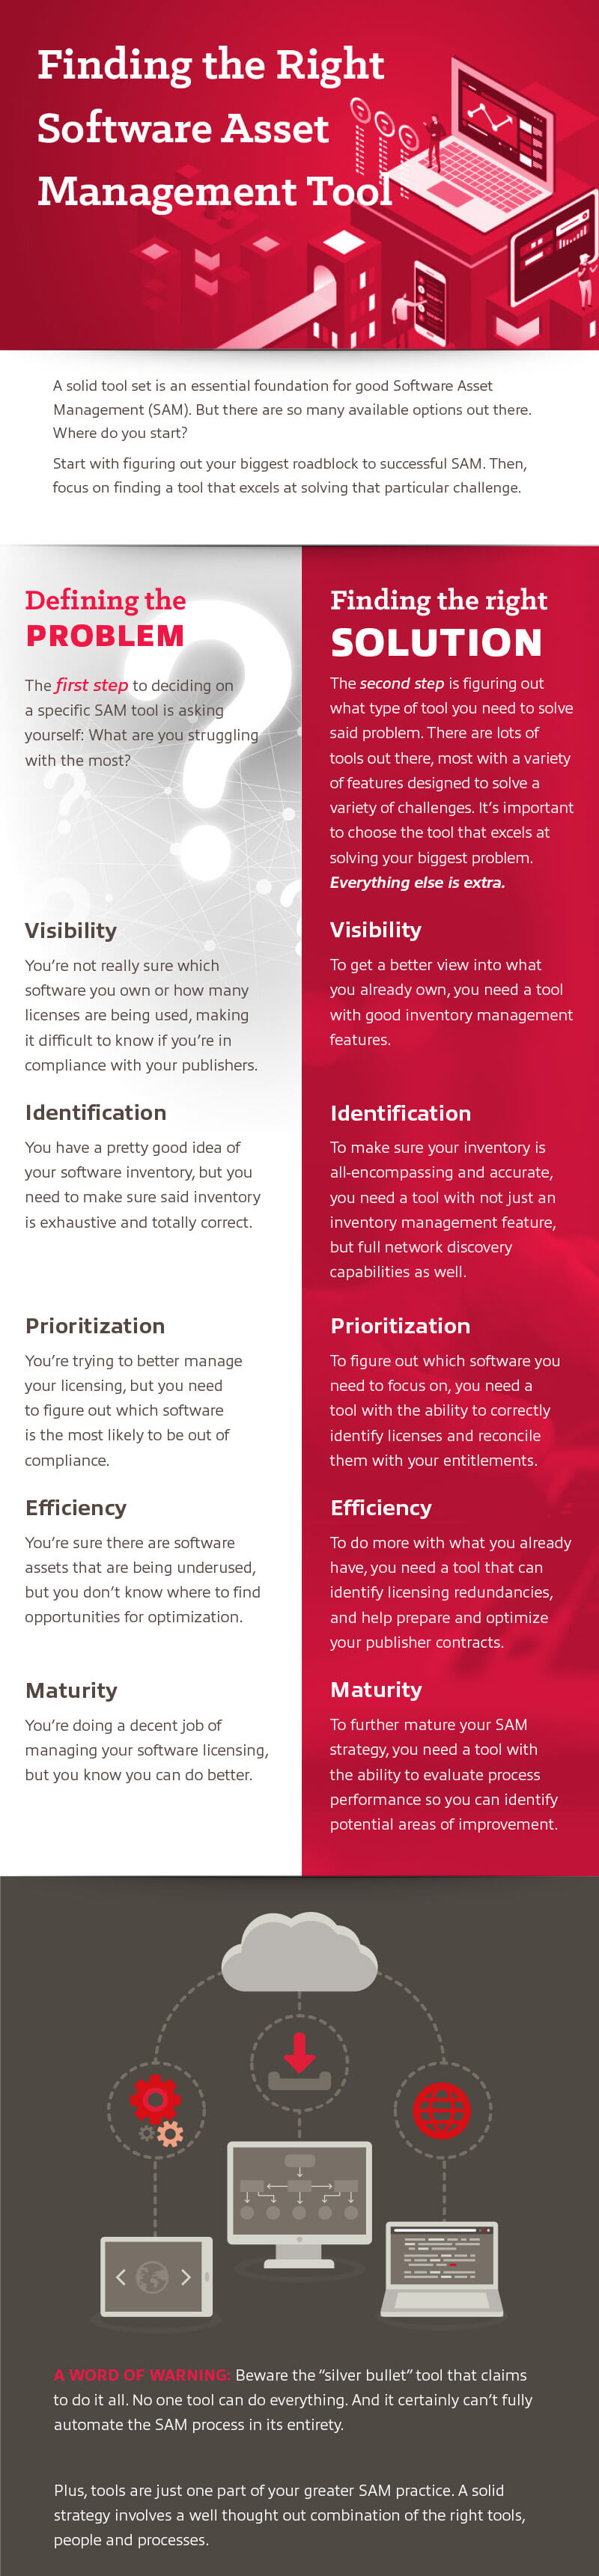 Infographic displayingFinding the Right Software Asset Management Tool as transcribed further below